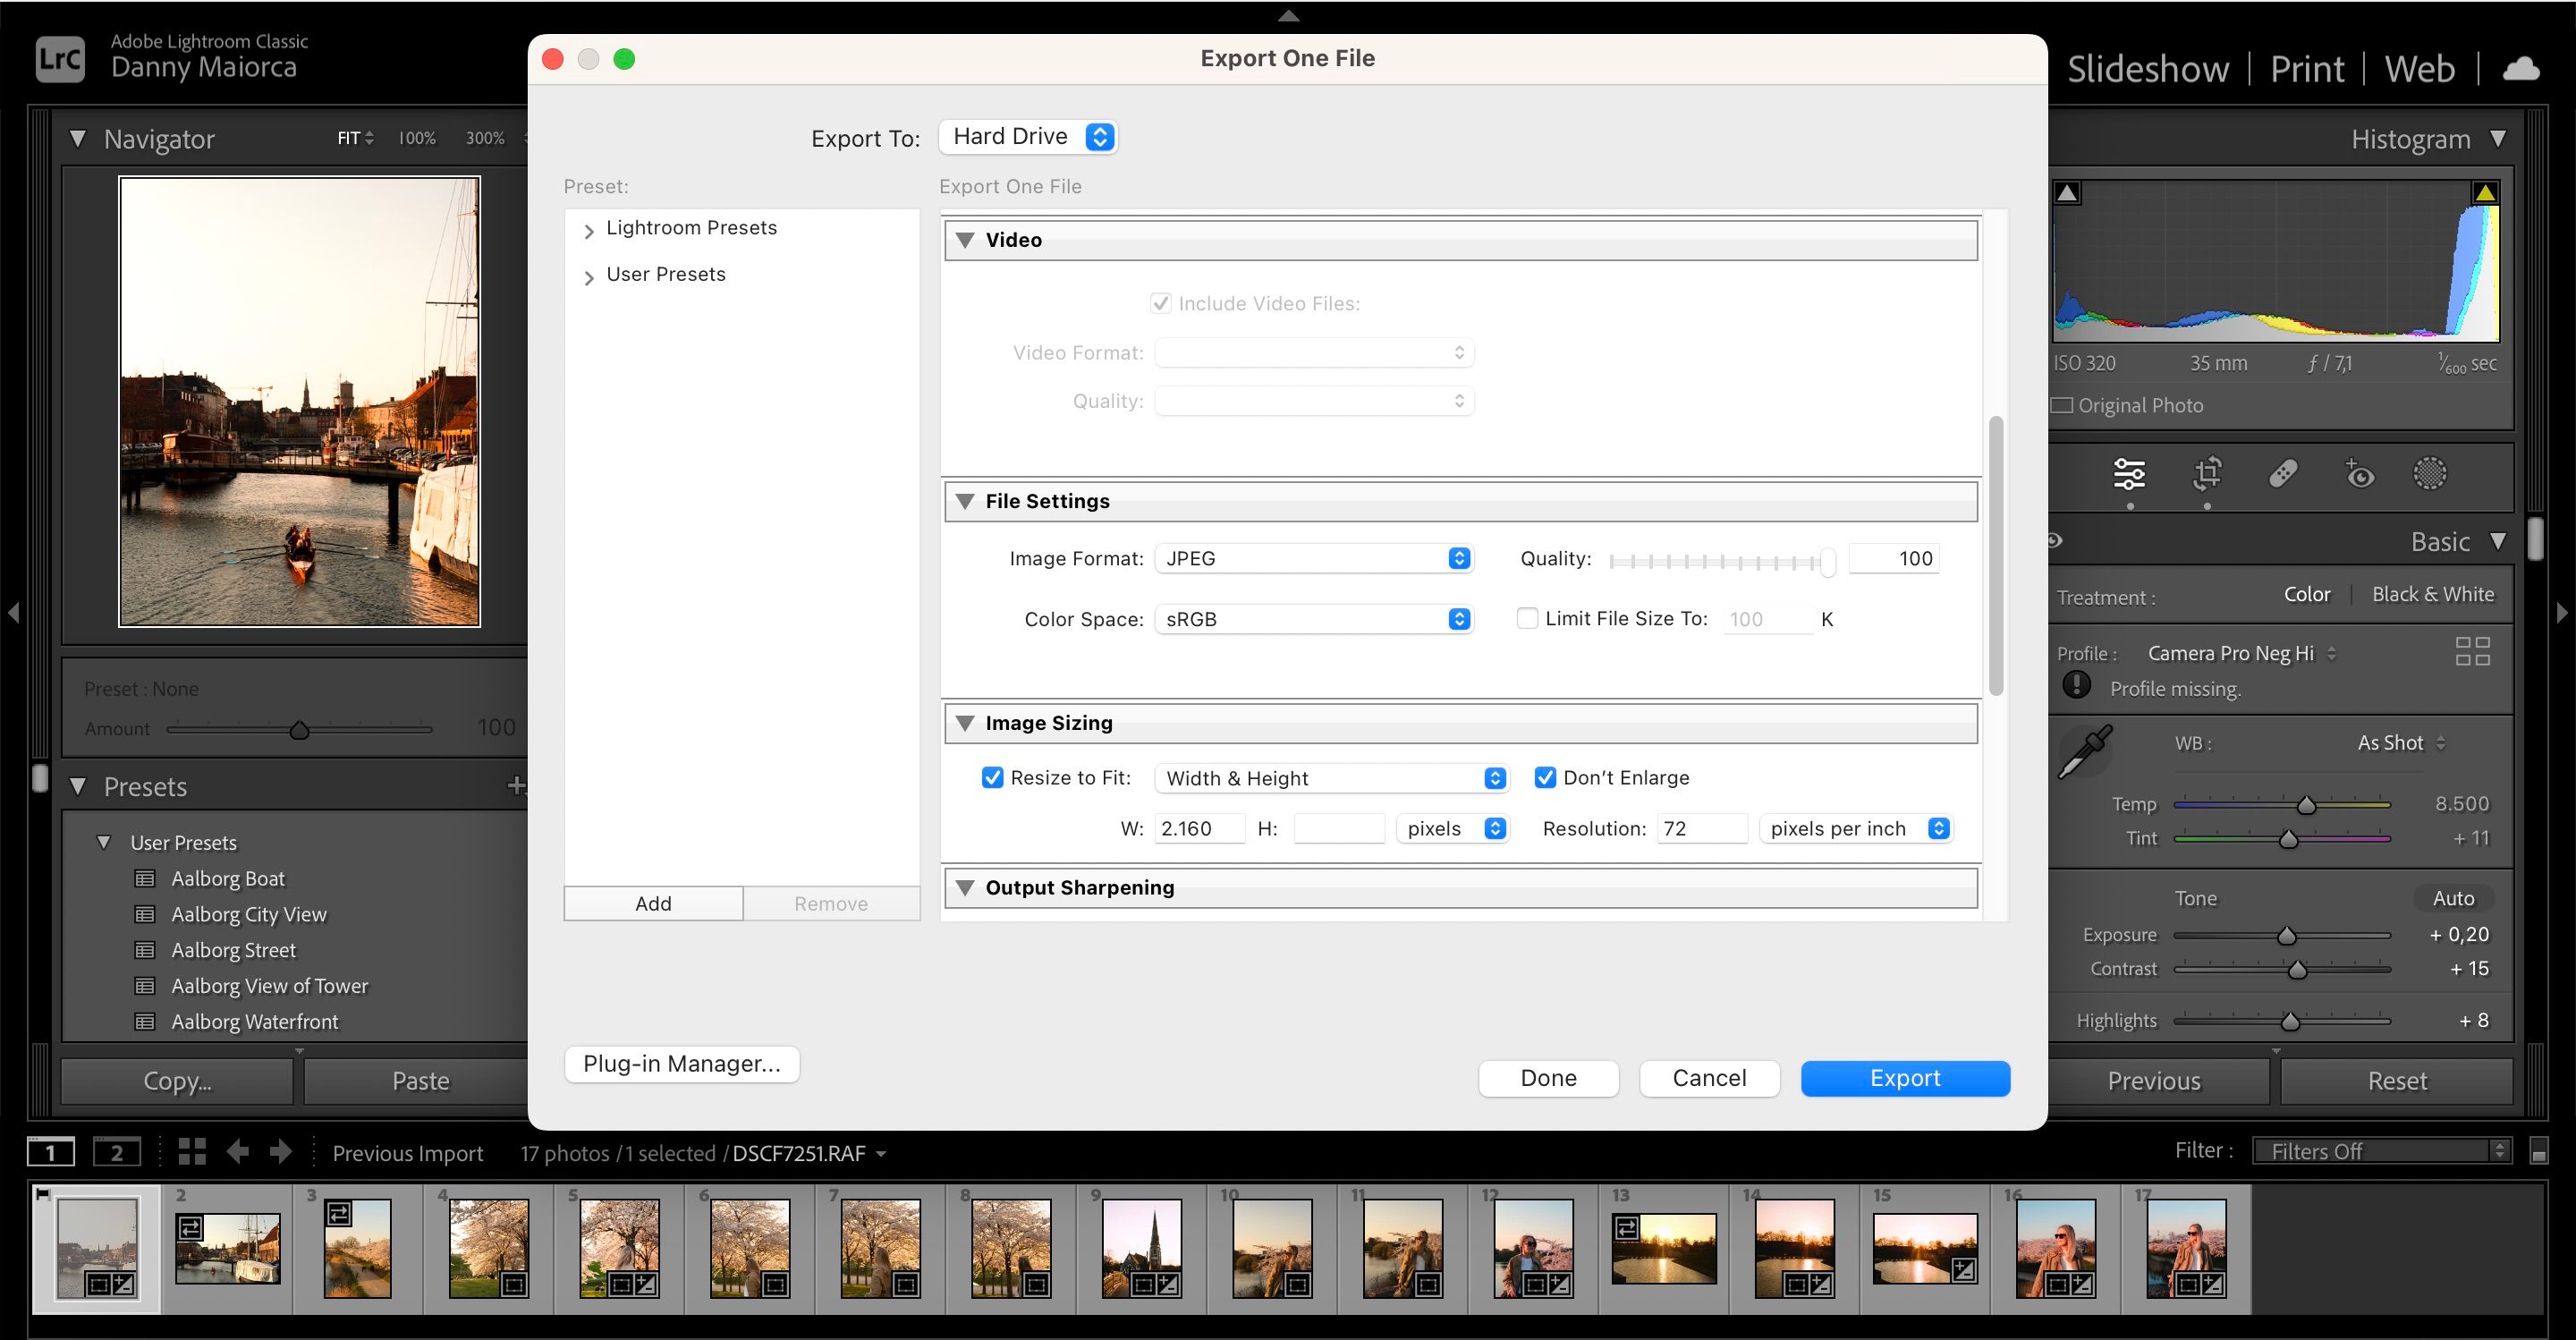 How to Resize Photo in Lightroom